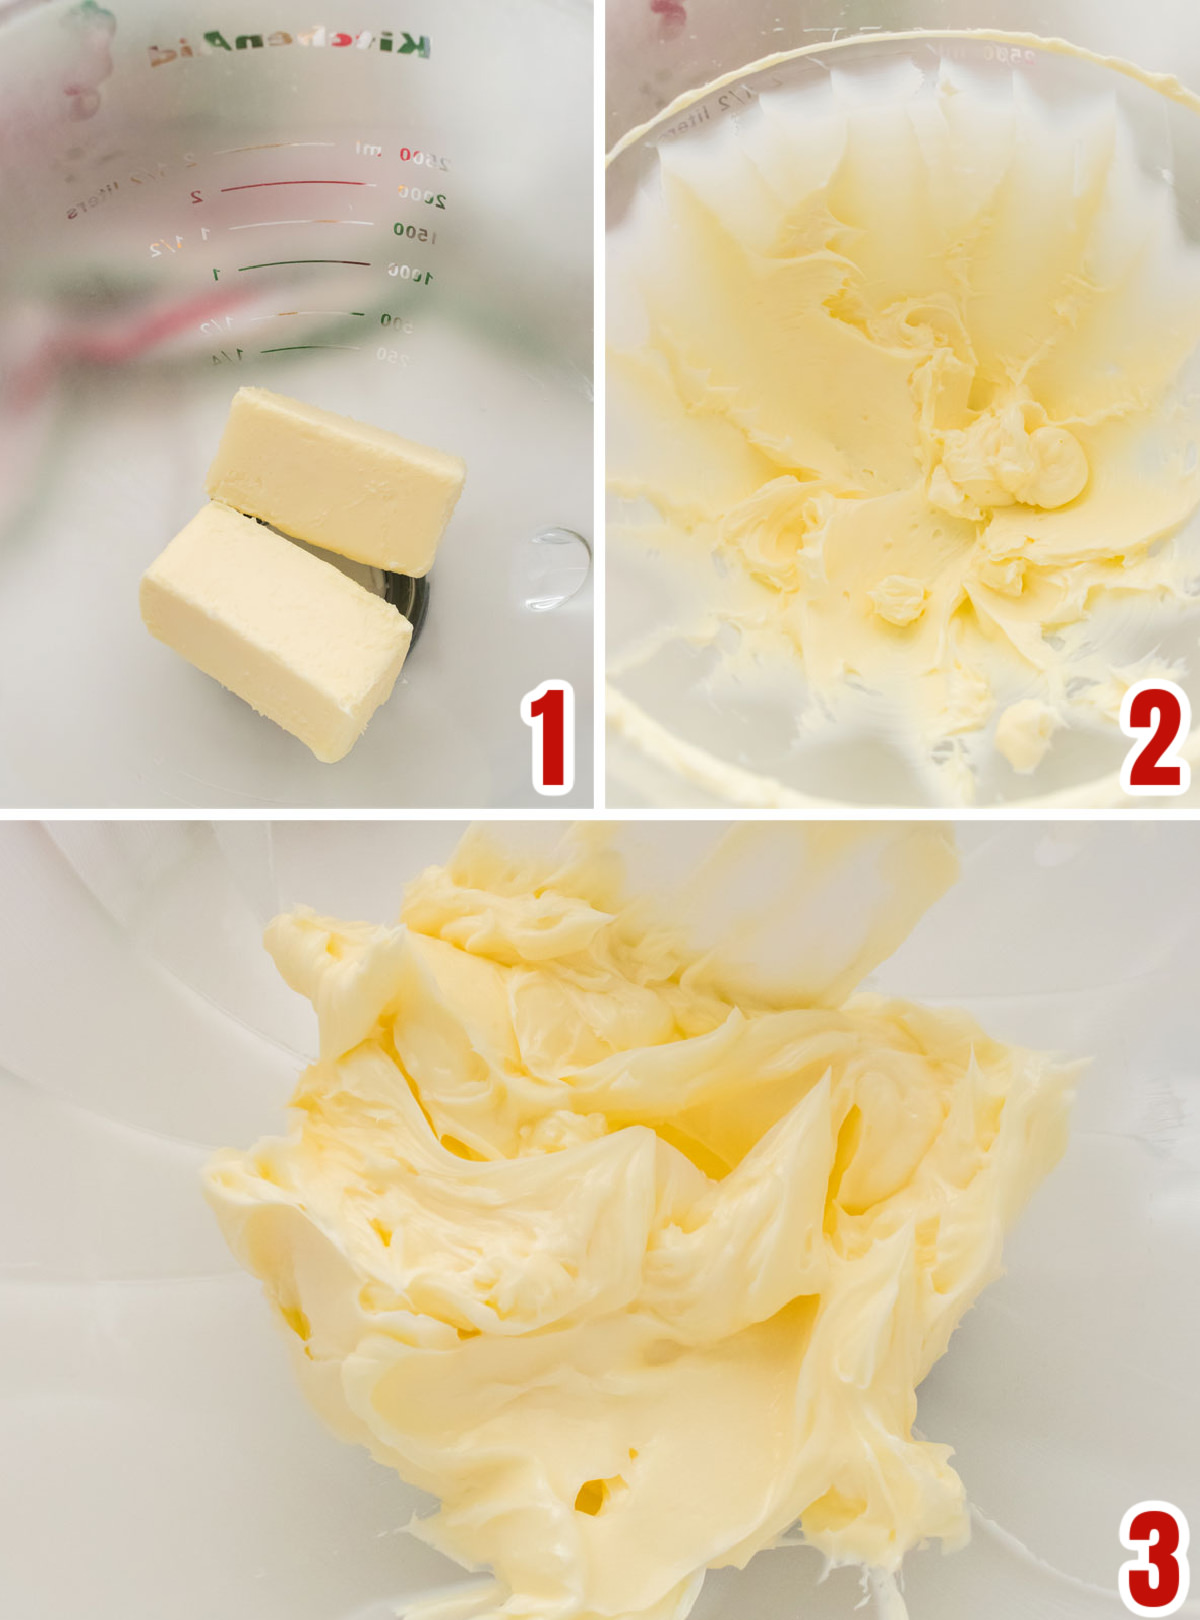 Collage image showing the steps for mixing the butter and the Rum Extract to get the best flavored frosting.